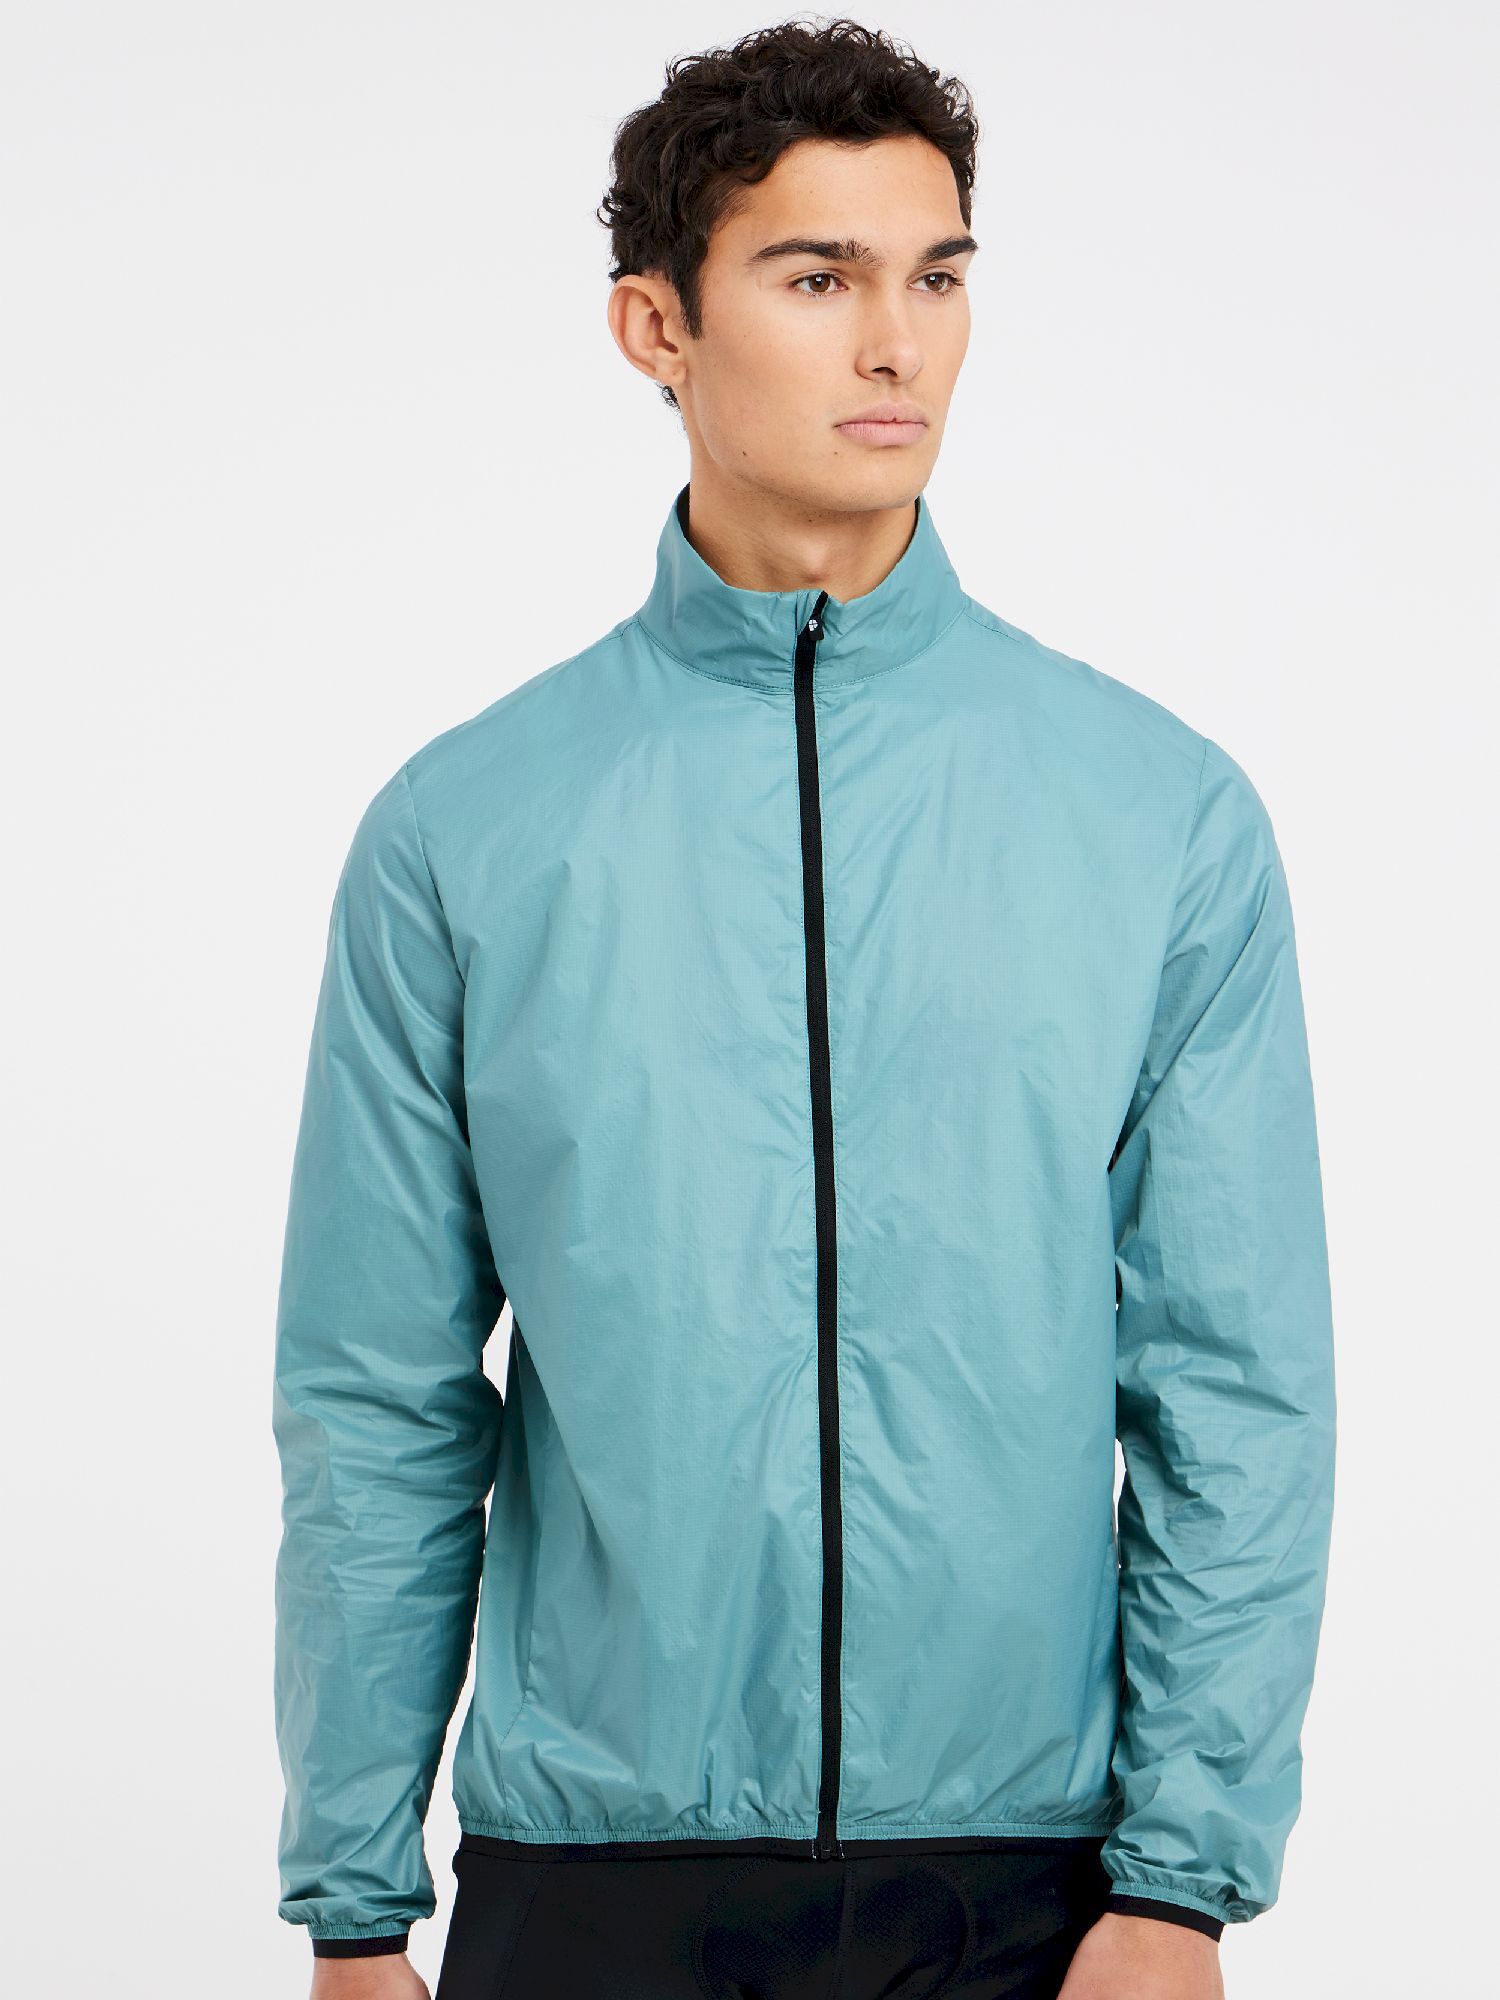 Protest Prtqueally - Cycling jacket - Men's | Hardloop